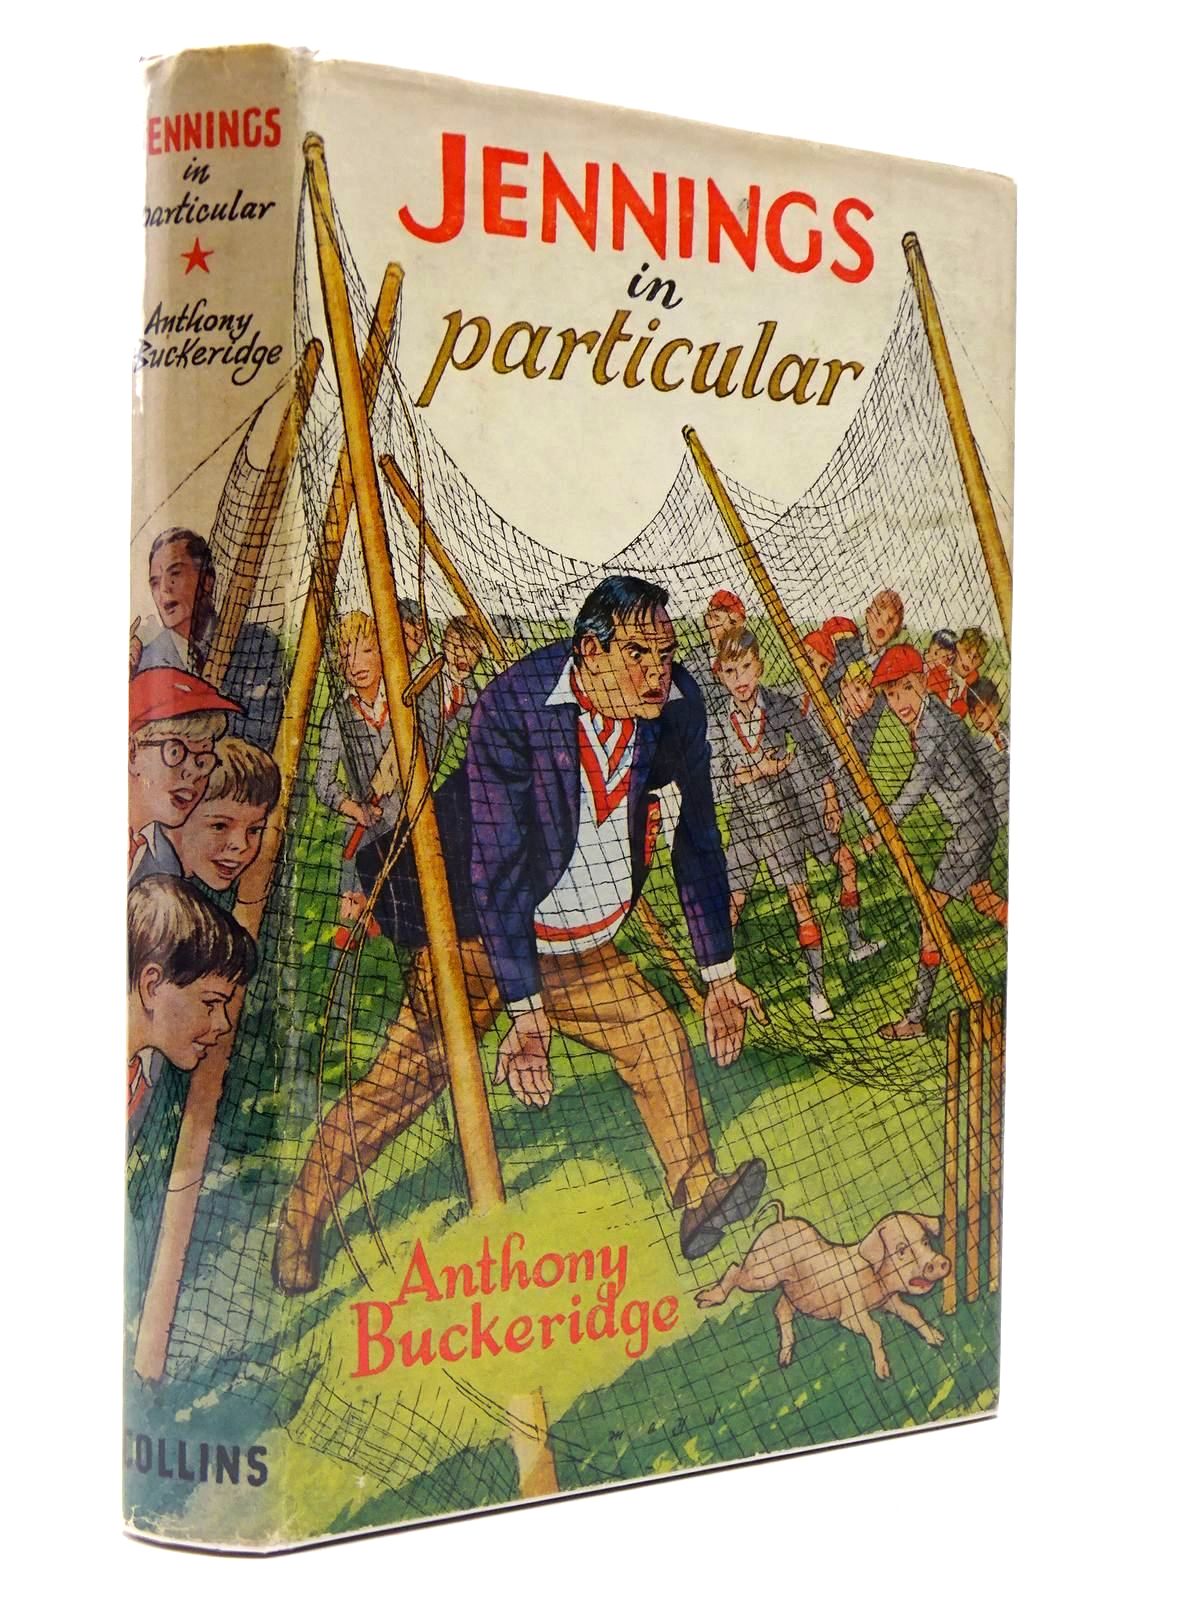 Cover of JENNINGS IN PARTICULAR by Anthony Buckeridge